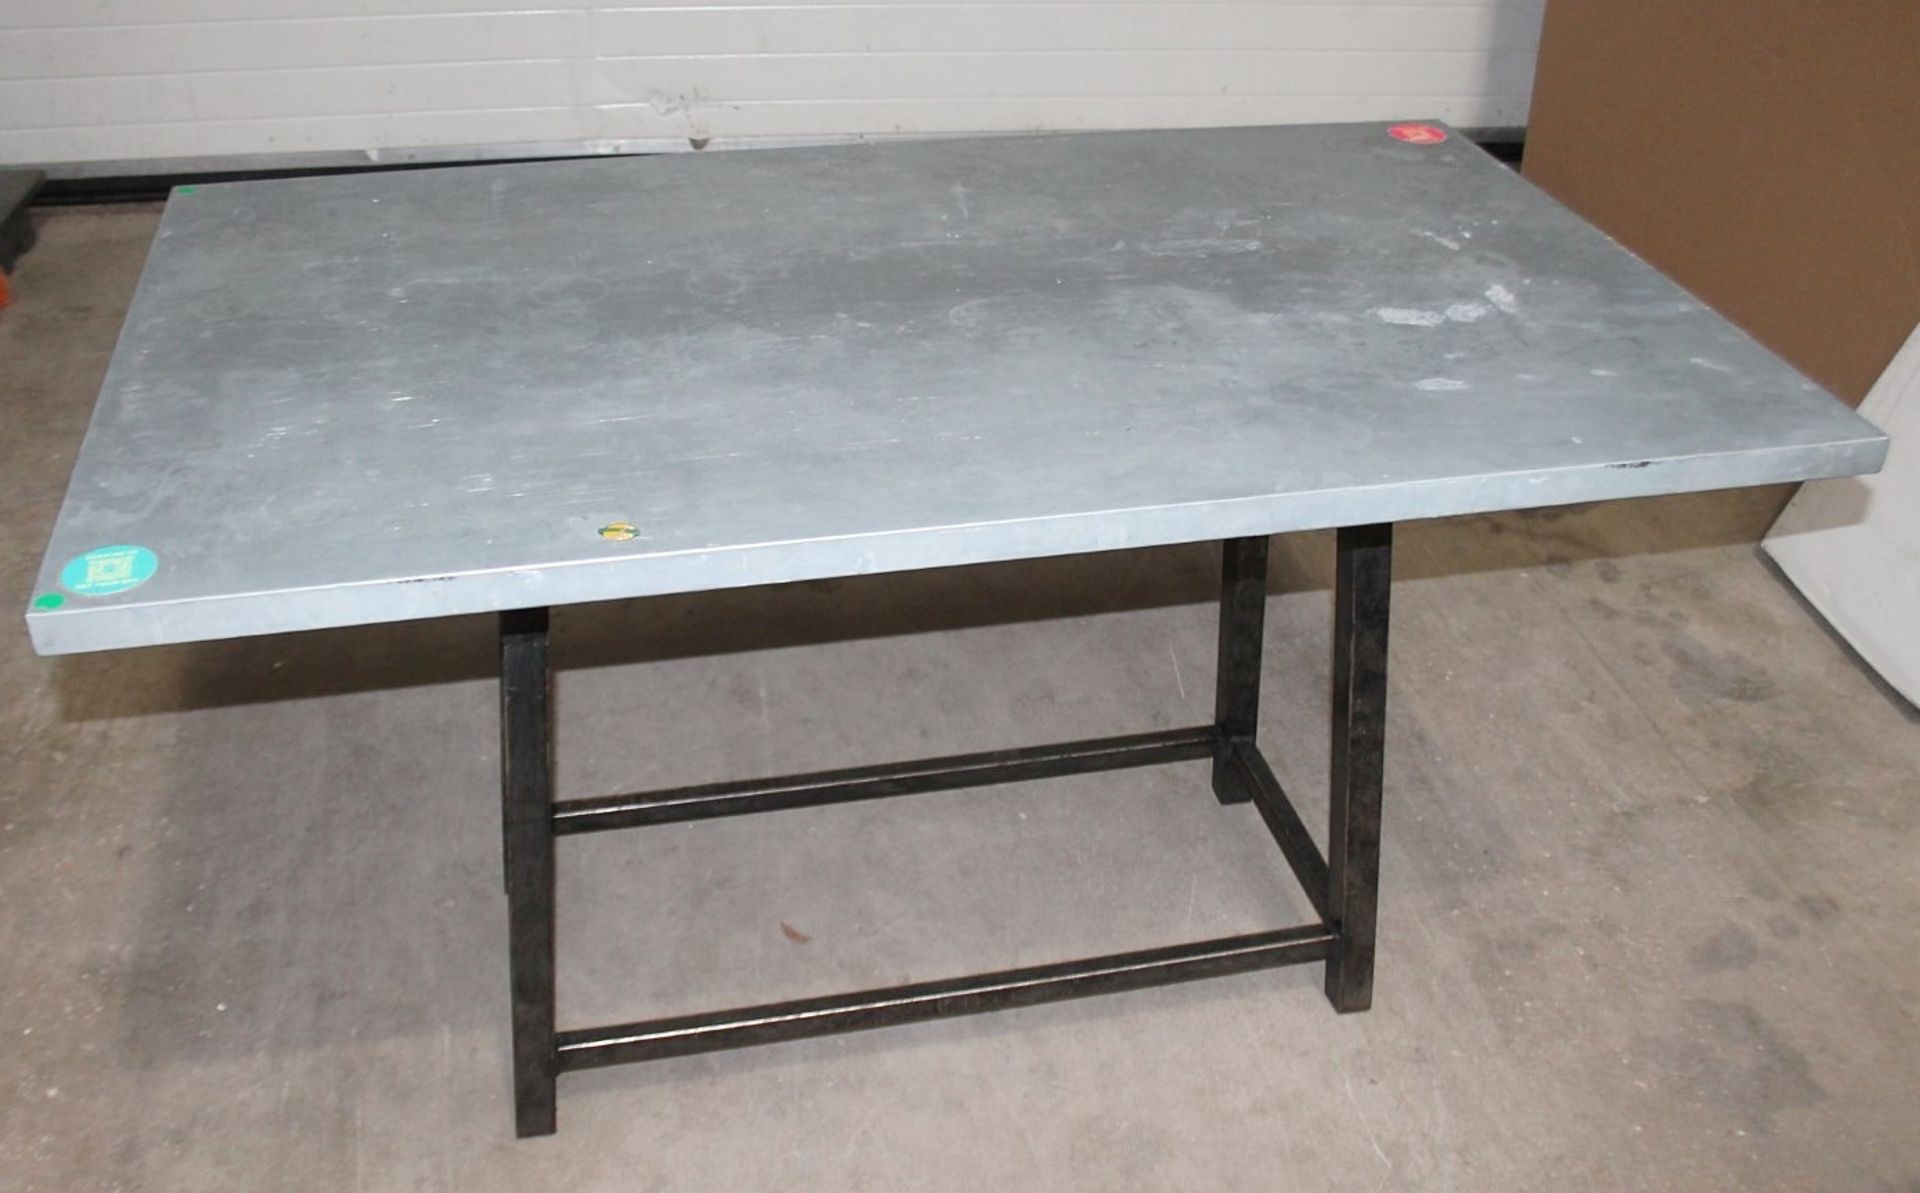 1 x Industrial-Style Metal Topped Restaurant Table With A Welded Iron Base - Dimensions: H74 x - Image 4 of 6